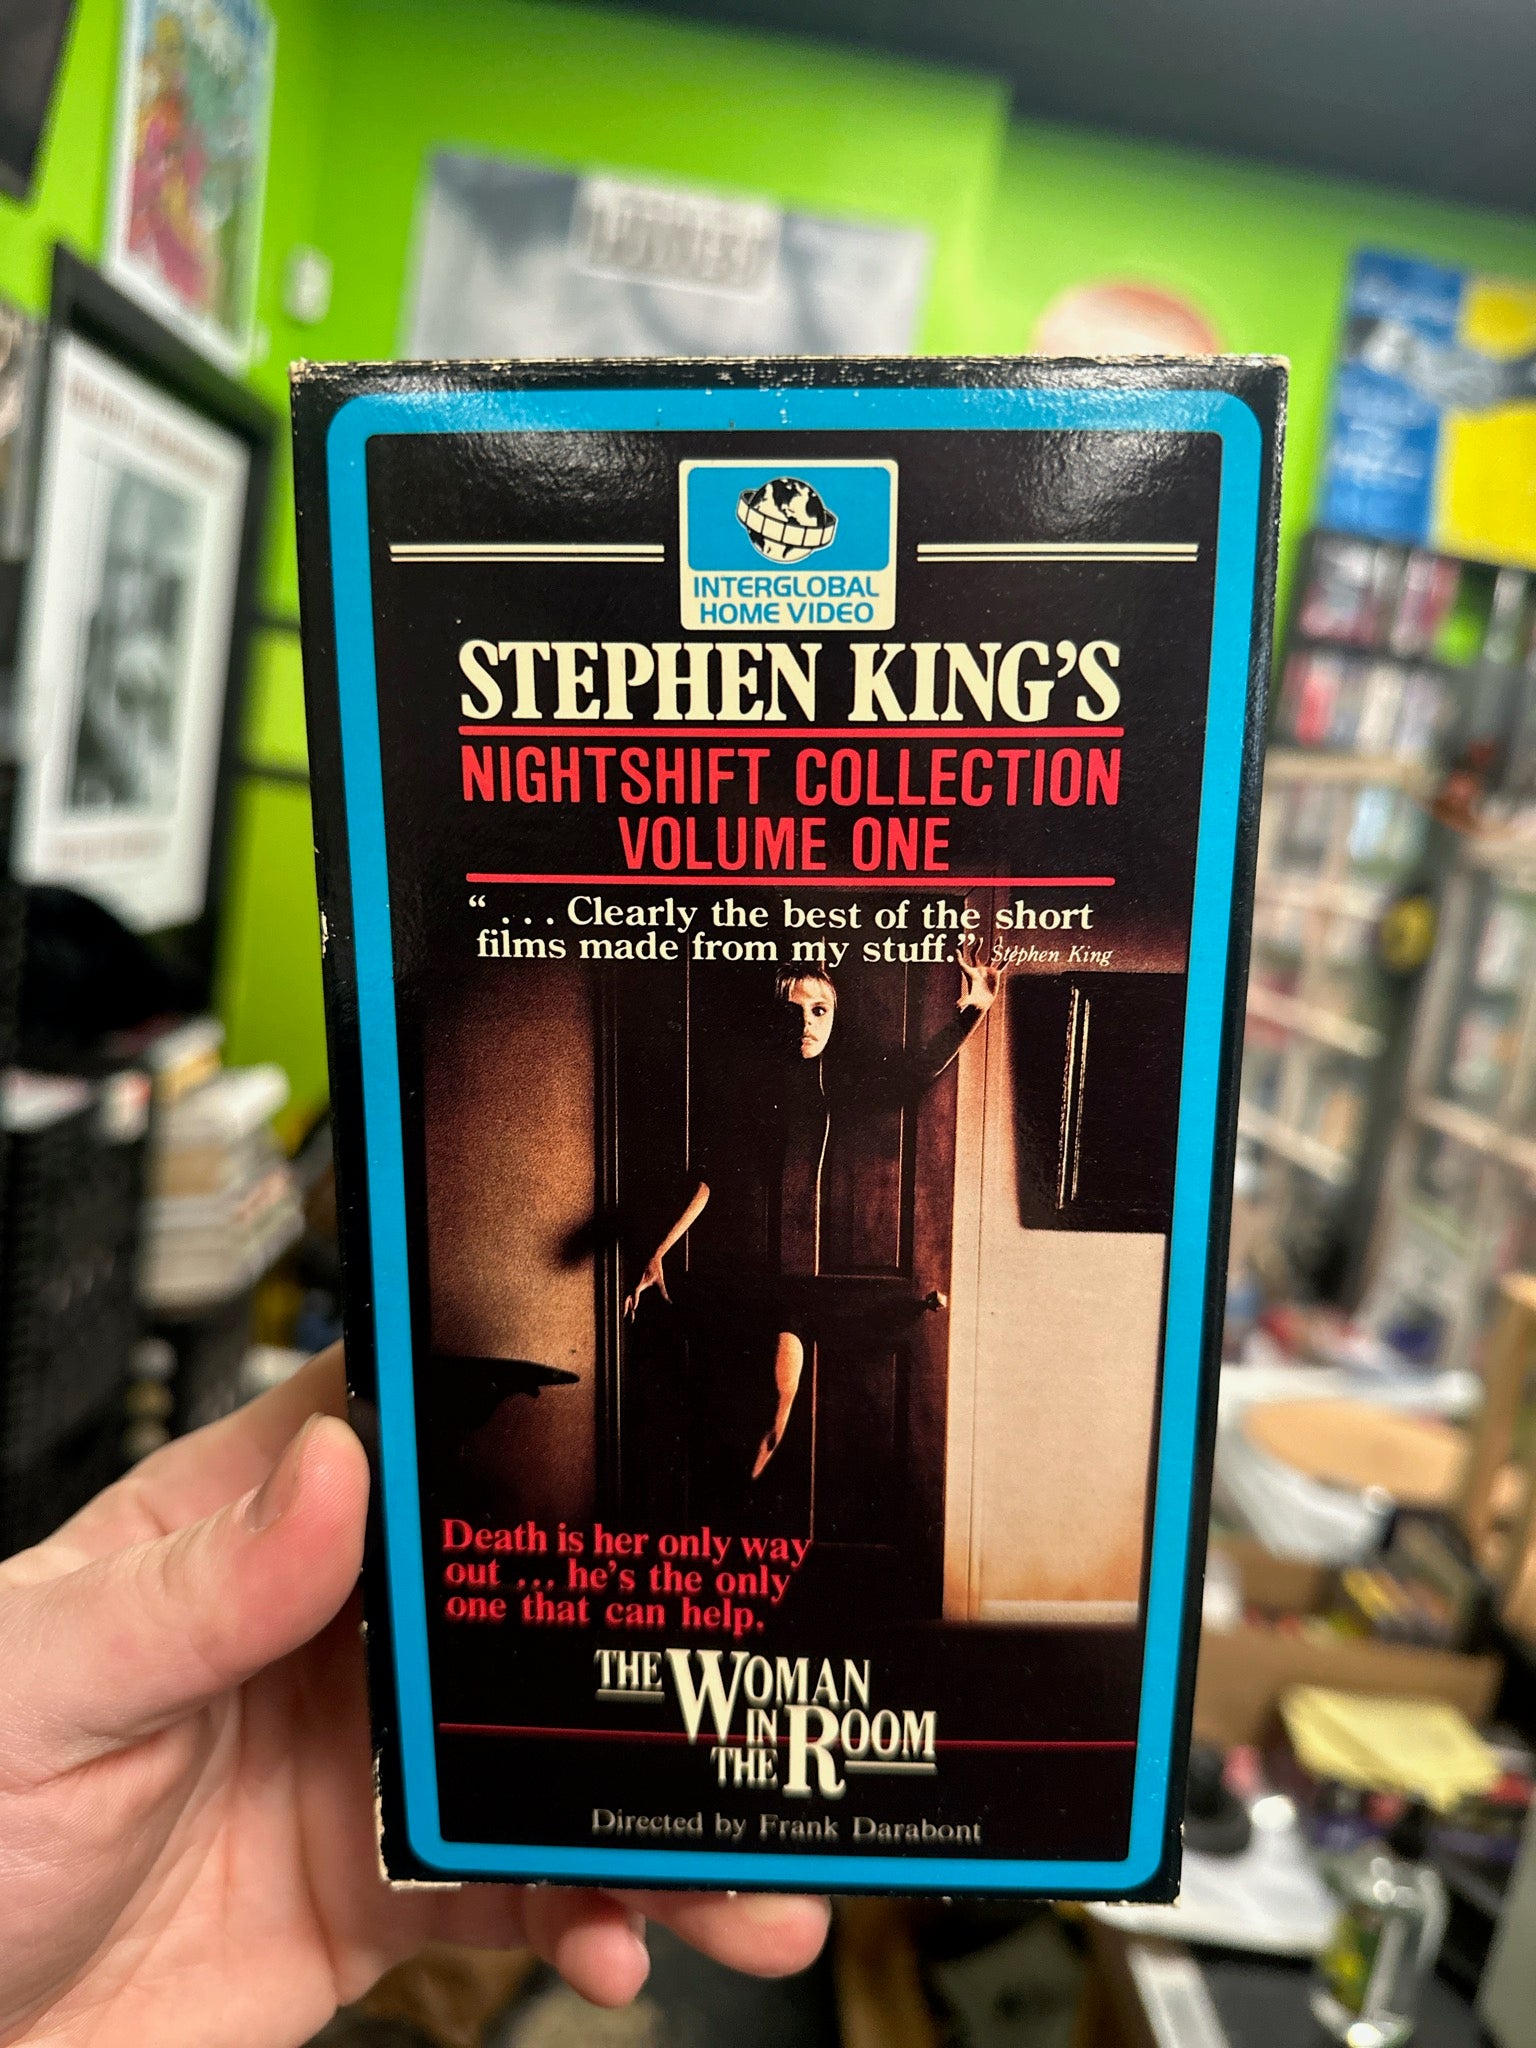 Stephen King's Nightshift Collection Vol. 1: The Woman In The Room